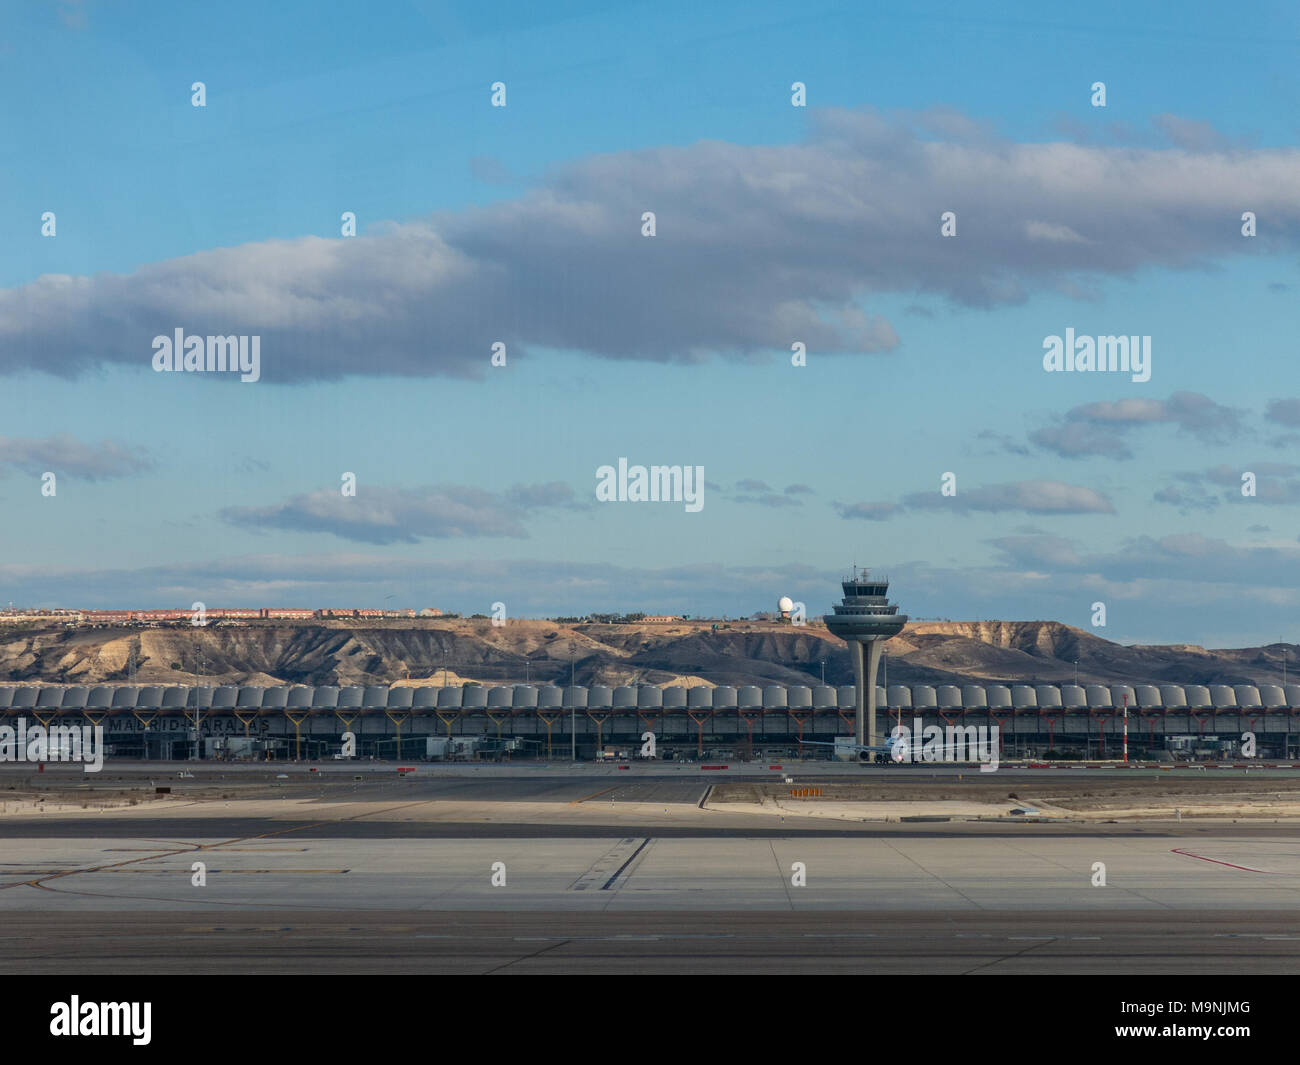 A plane prepares to take off on the runway of Terminal T4 the Adolfo Suarez Madrid Barajas Airport. Barajas is the main international airport serving Stock Photo